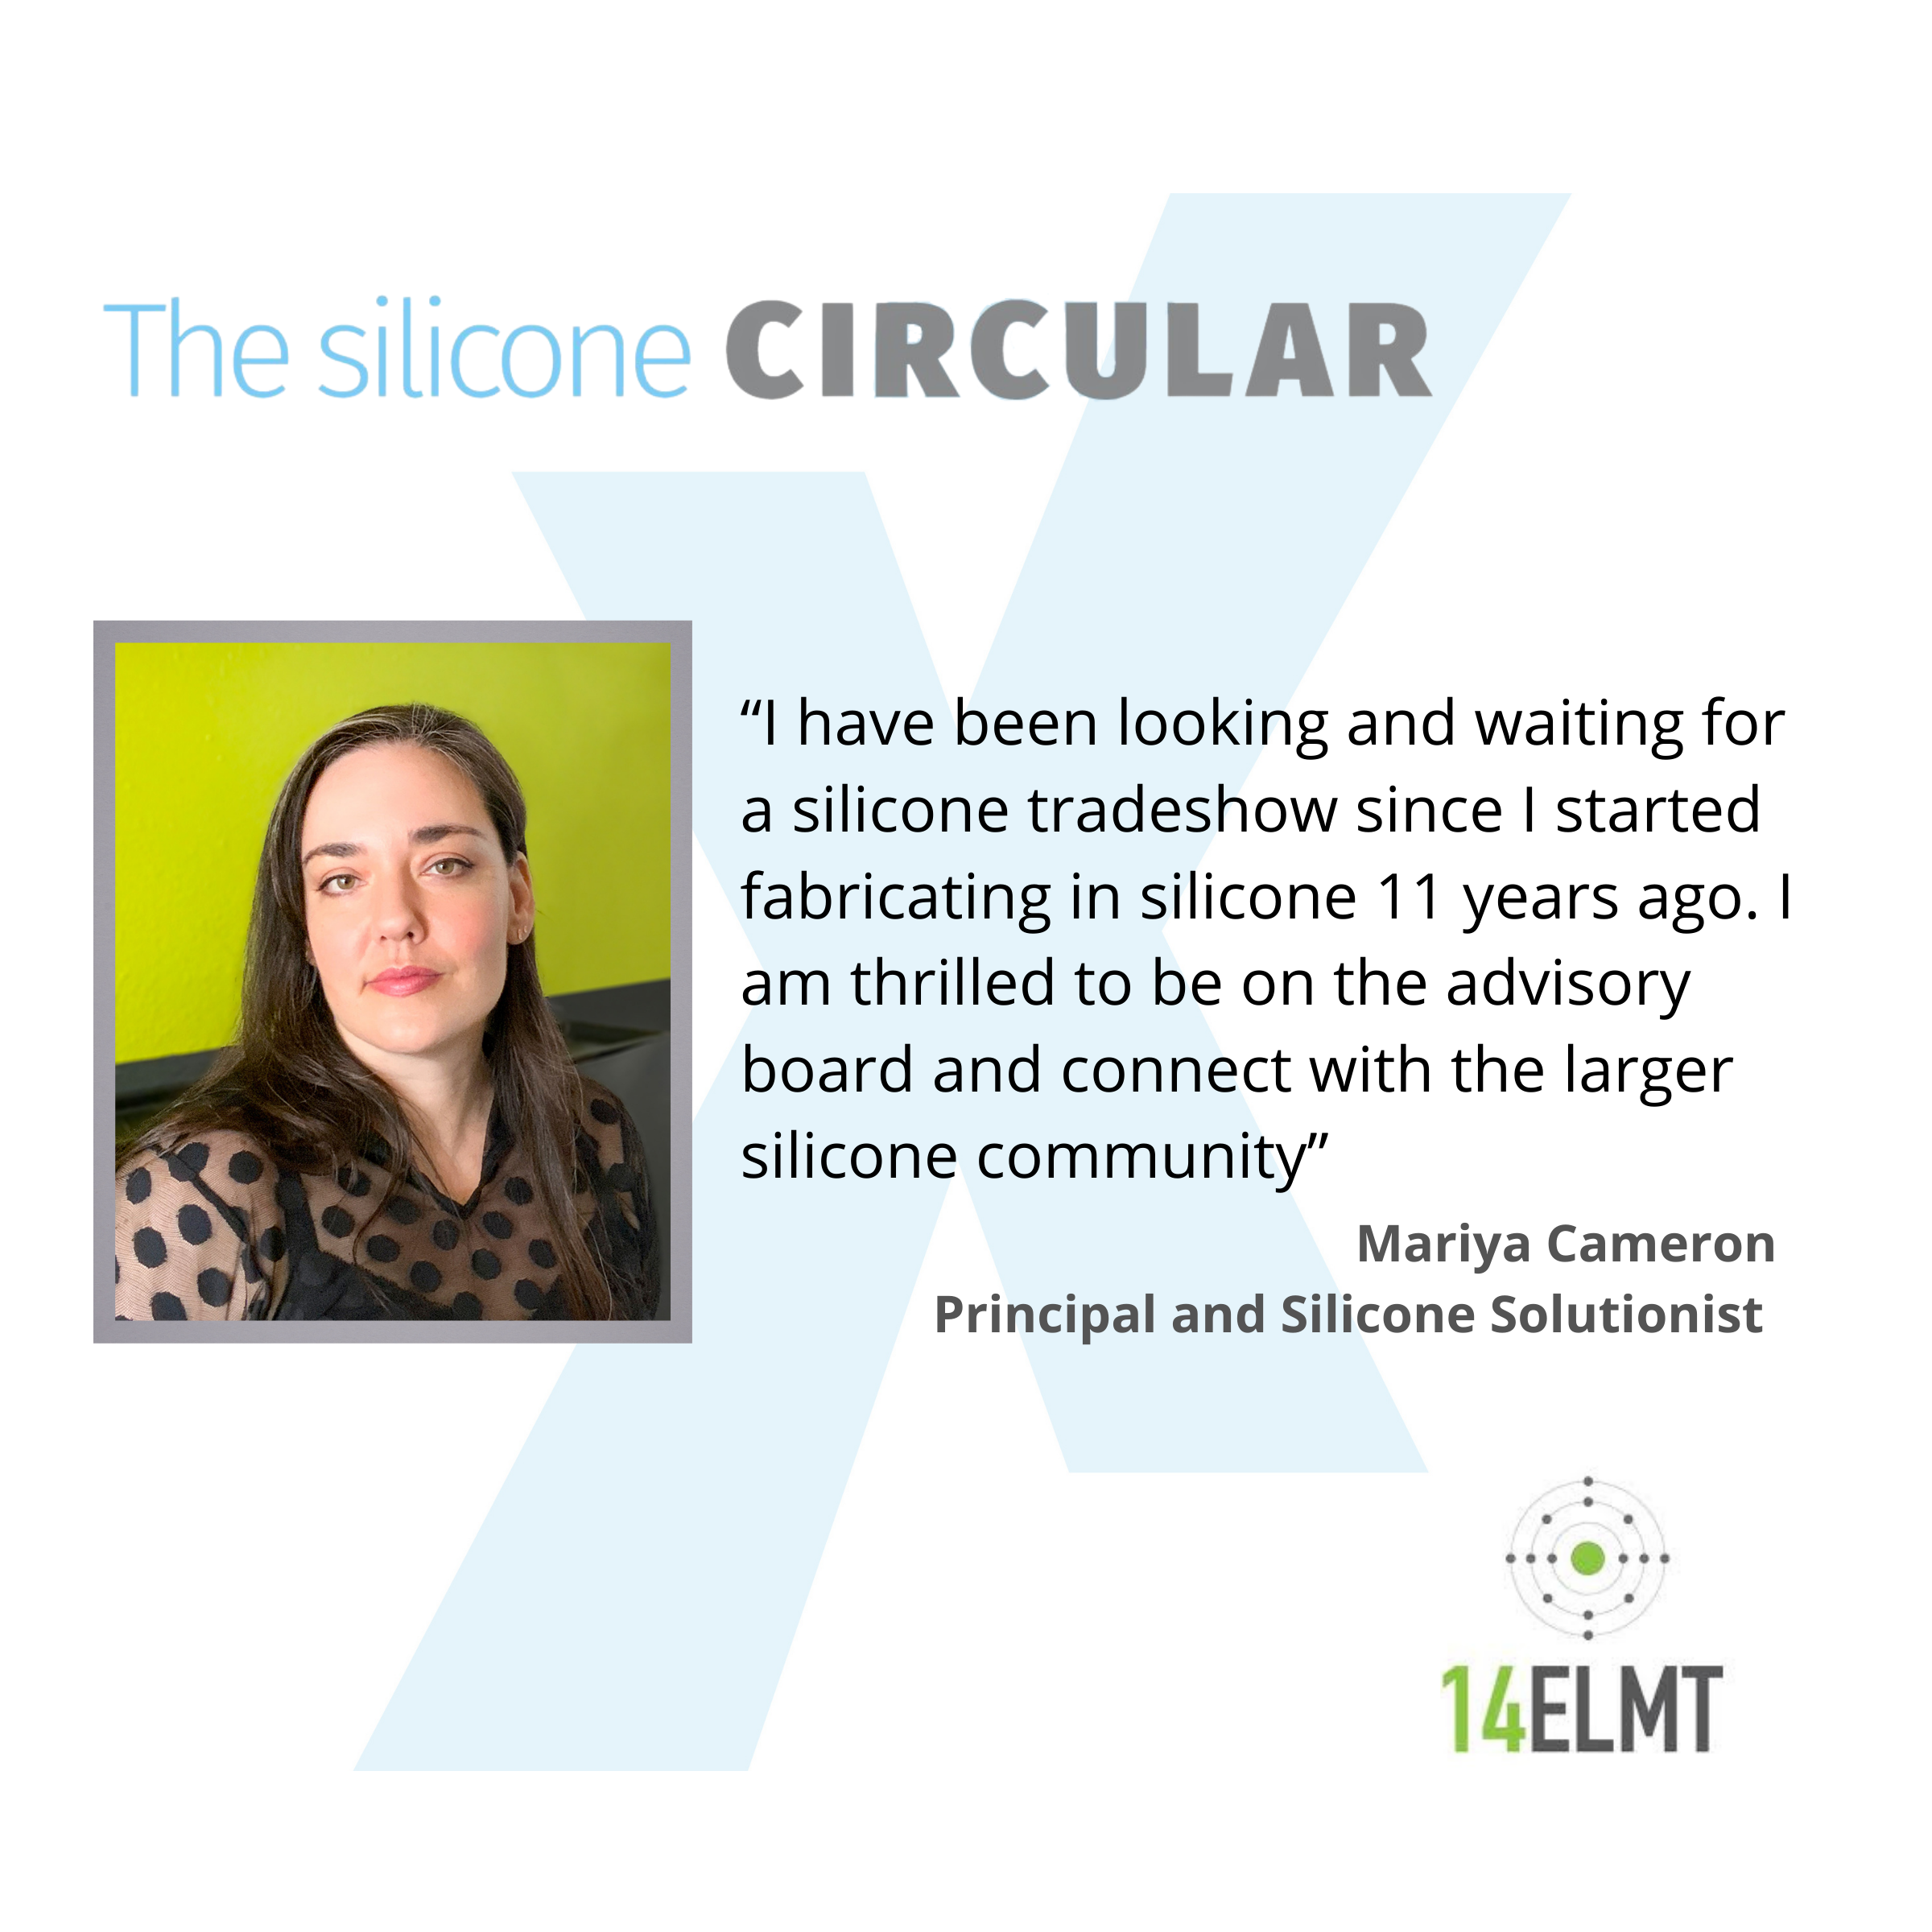 mariya cameron, 14elmt, 14the element solutions, silicone expo, silicones, silicone, trade show, elastomers, fluids, resins, gels, silanes, silicon, gaskets, polymers, injection molding, extrusions, sealants, adhesives, lamination, release agent, automotive, aerospace, medical, construction, electronics, mass transit, hvac, converters, testing equipment, hot melting,